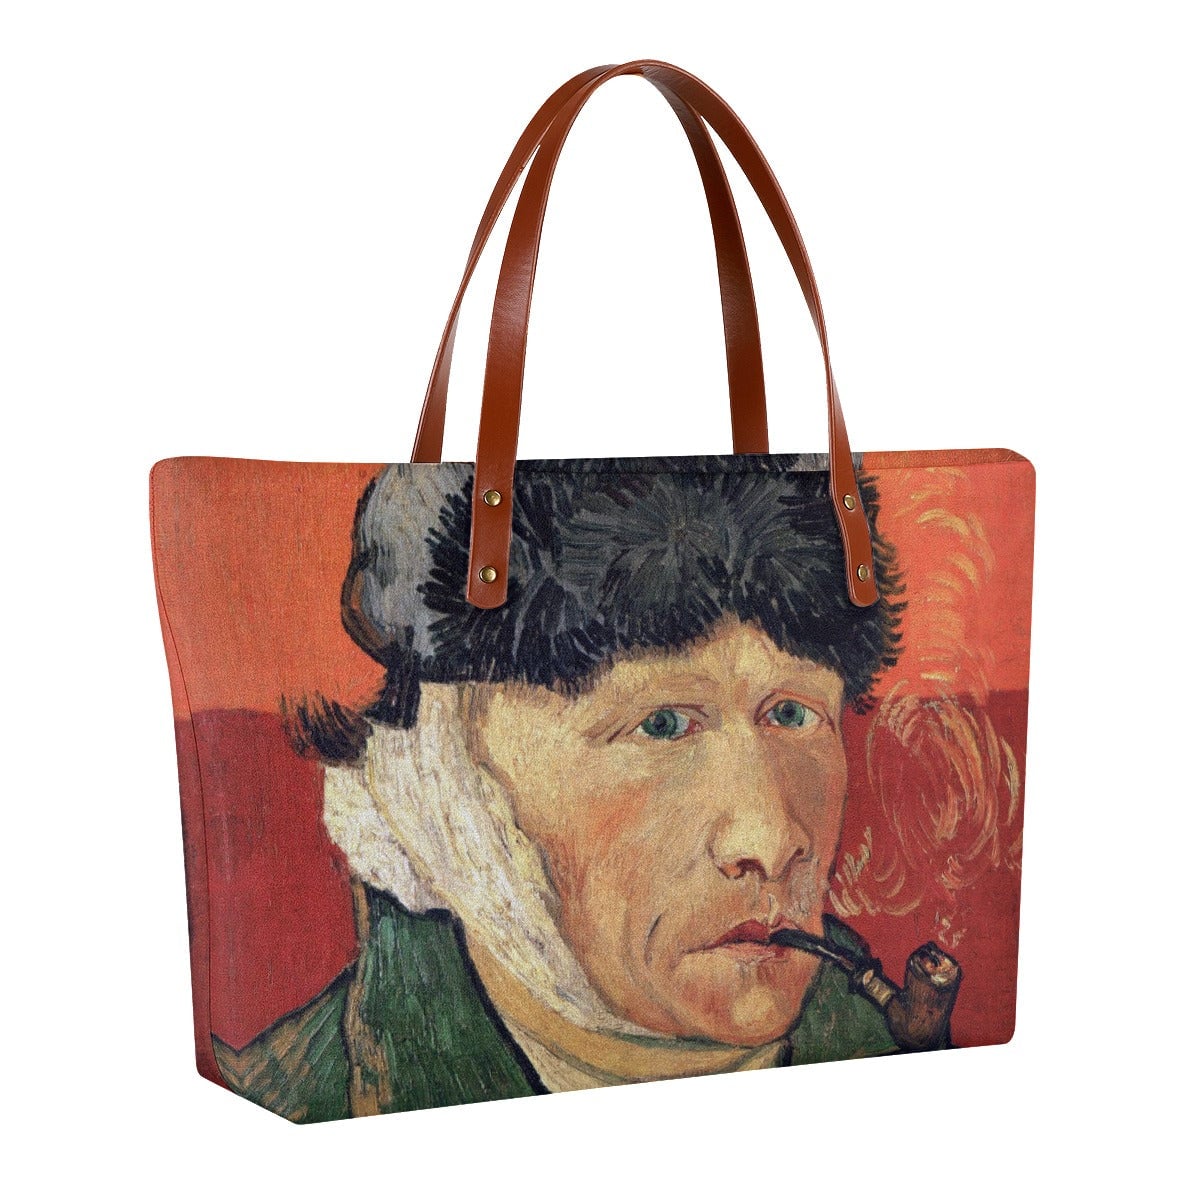 Van Gogh’s Self-Portrait with Bandaged Ear and Pipe Tote Bag